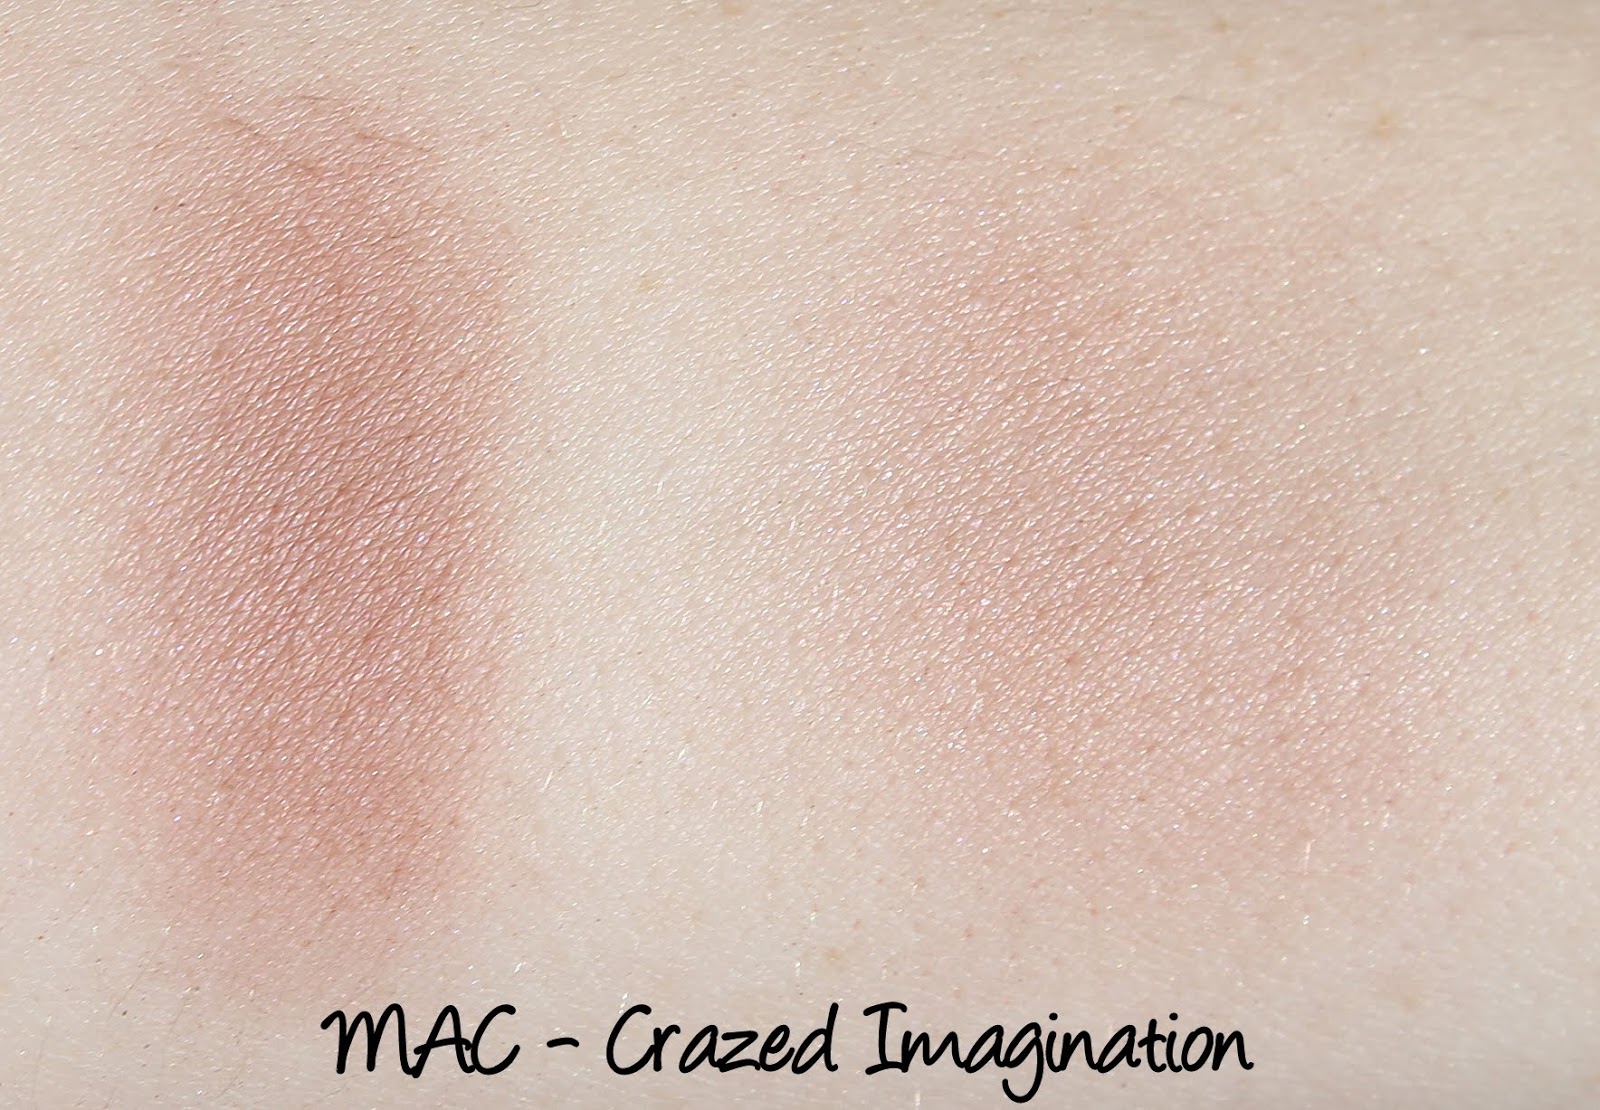 MAC X Rocky Horror Picture Show: Crazed Imagination Blush Swatches & Review